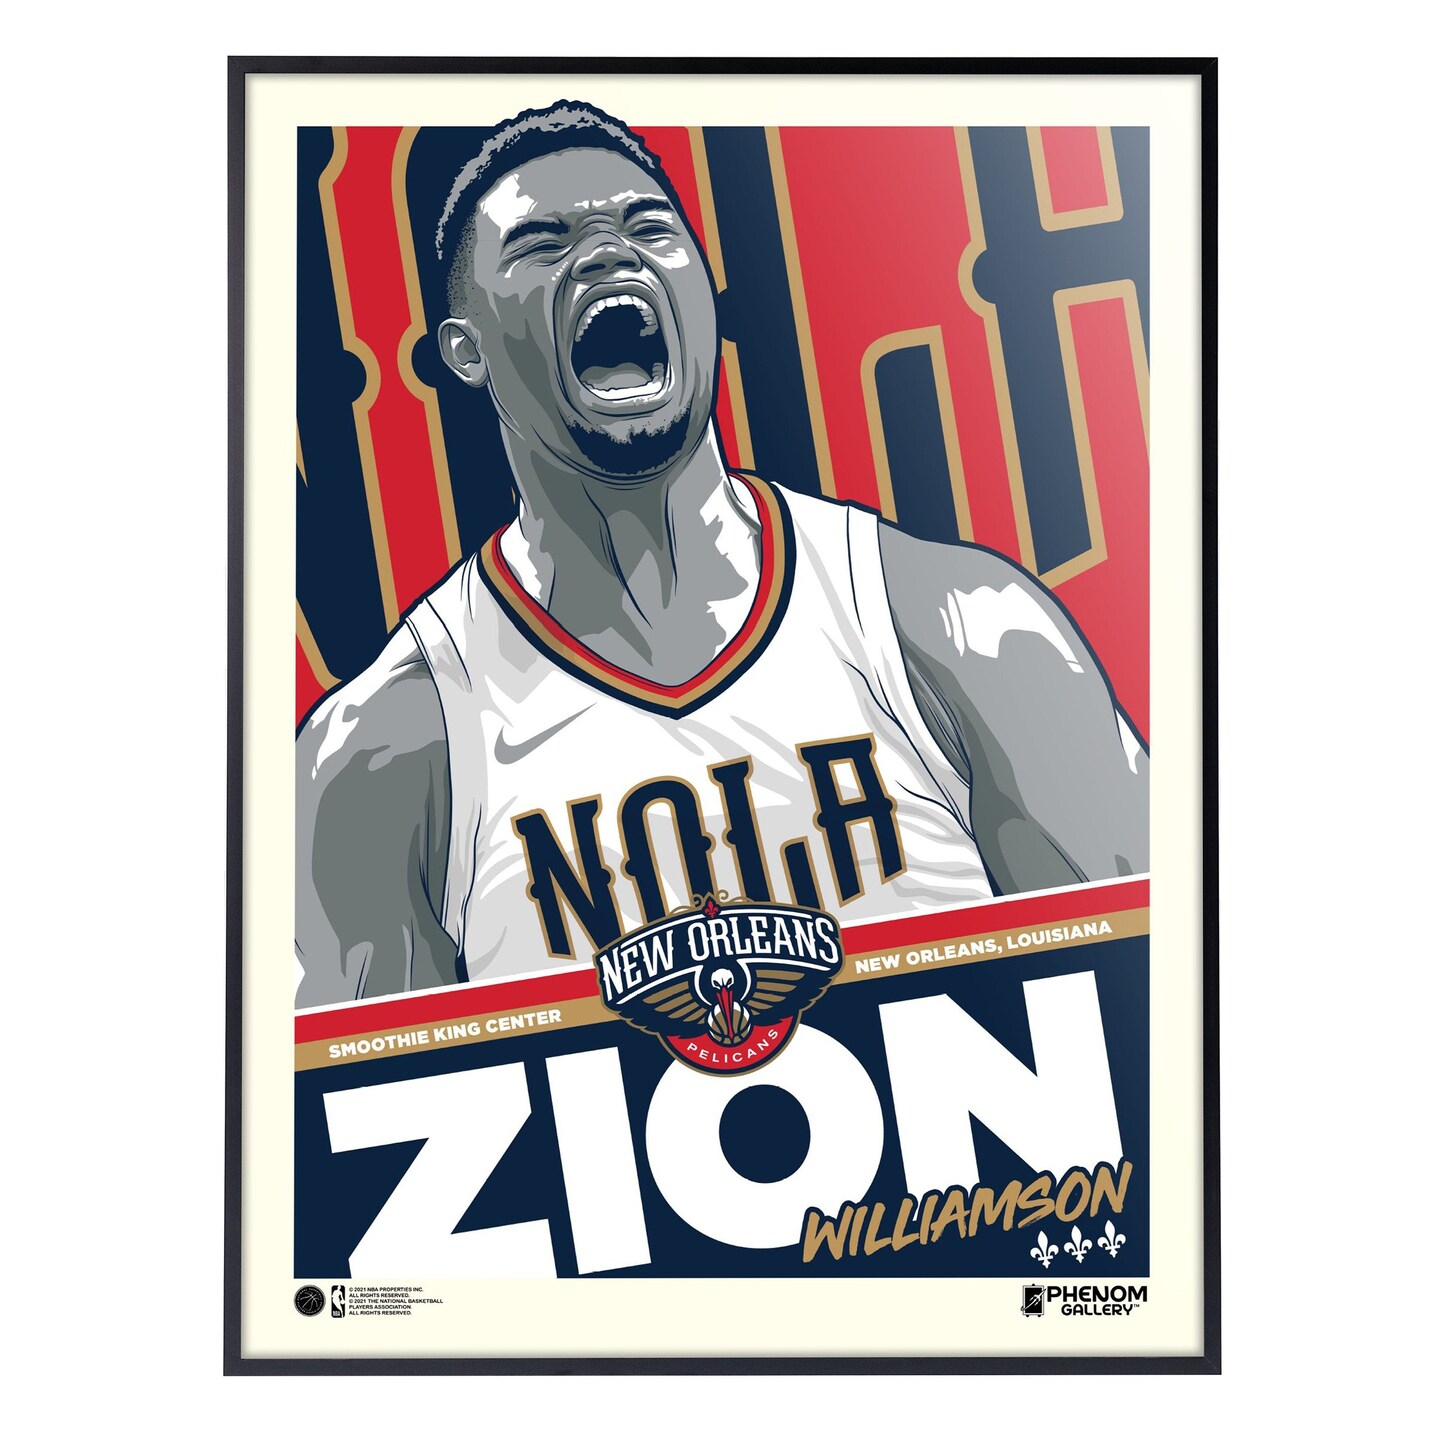 Basketball - Zion Williamson Signed & Framed New Orleans Pelicans